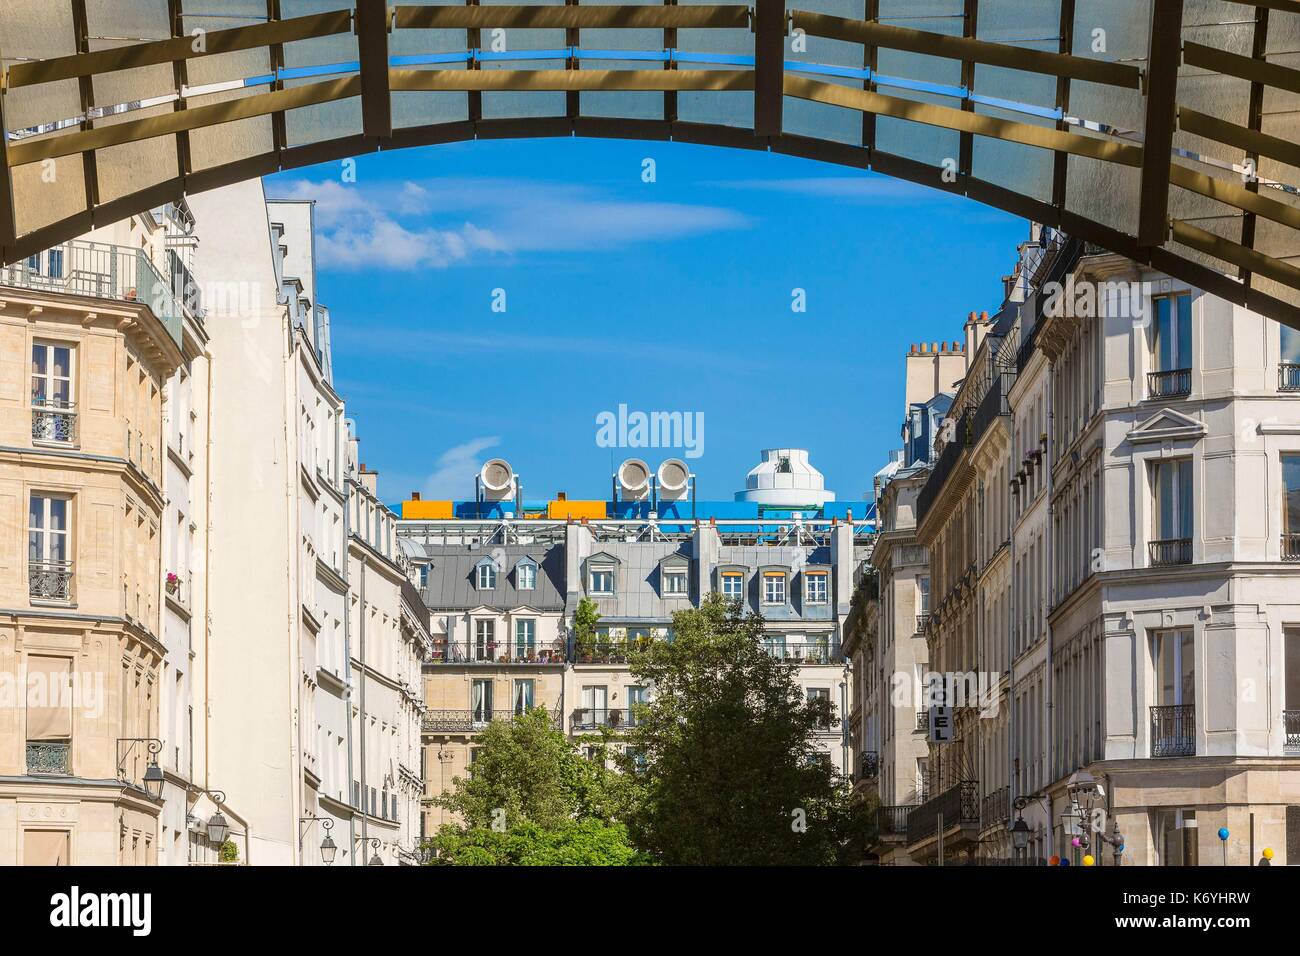 France, Paris, Les Halles district, the Beaubourg center seen through the new canopy Stock Photo